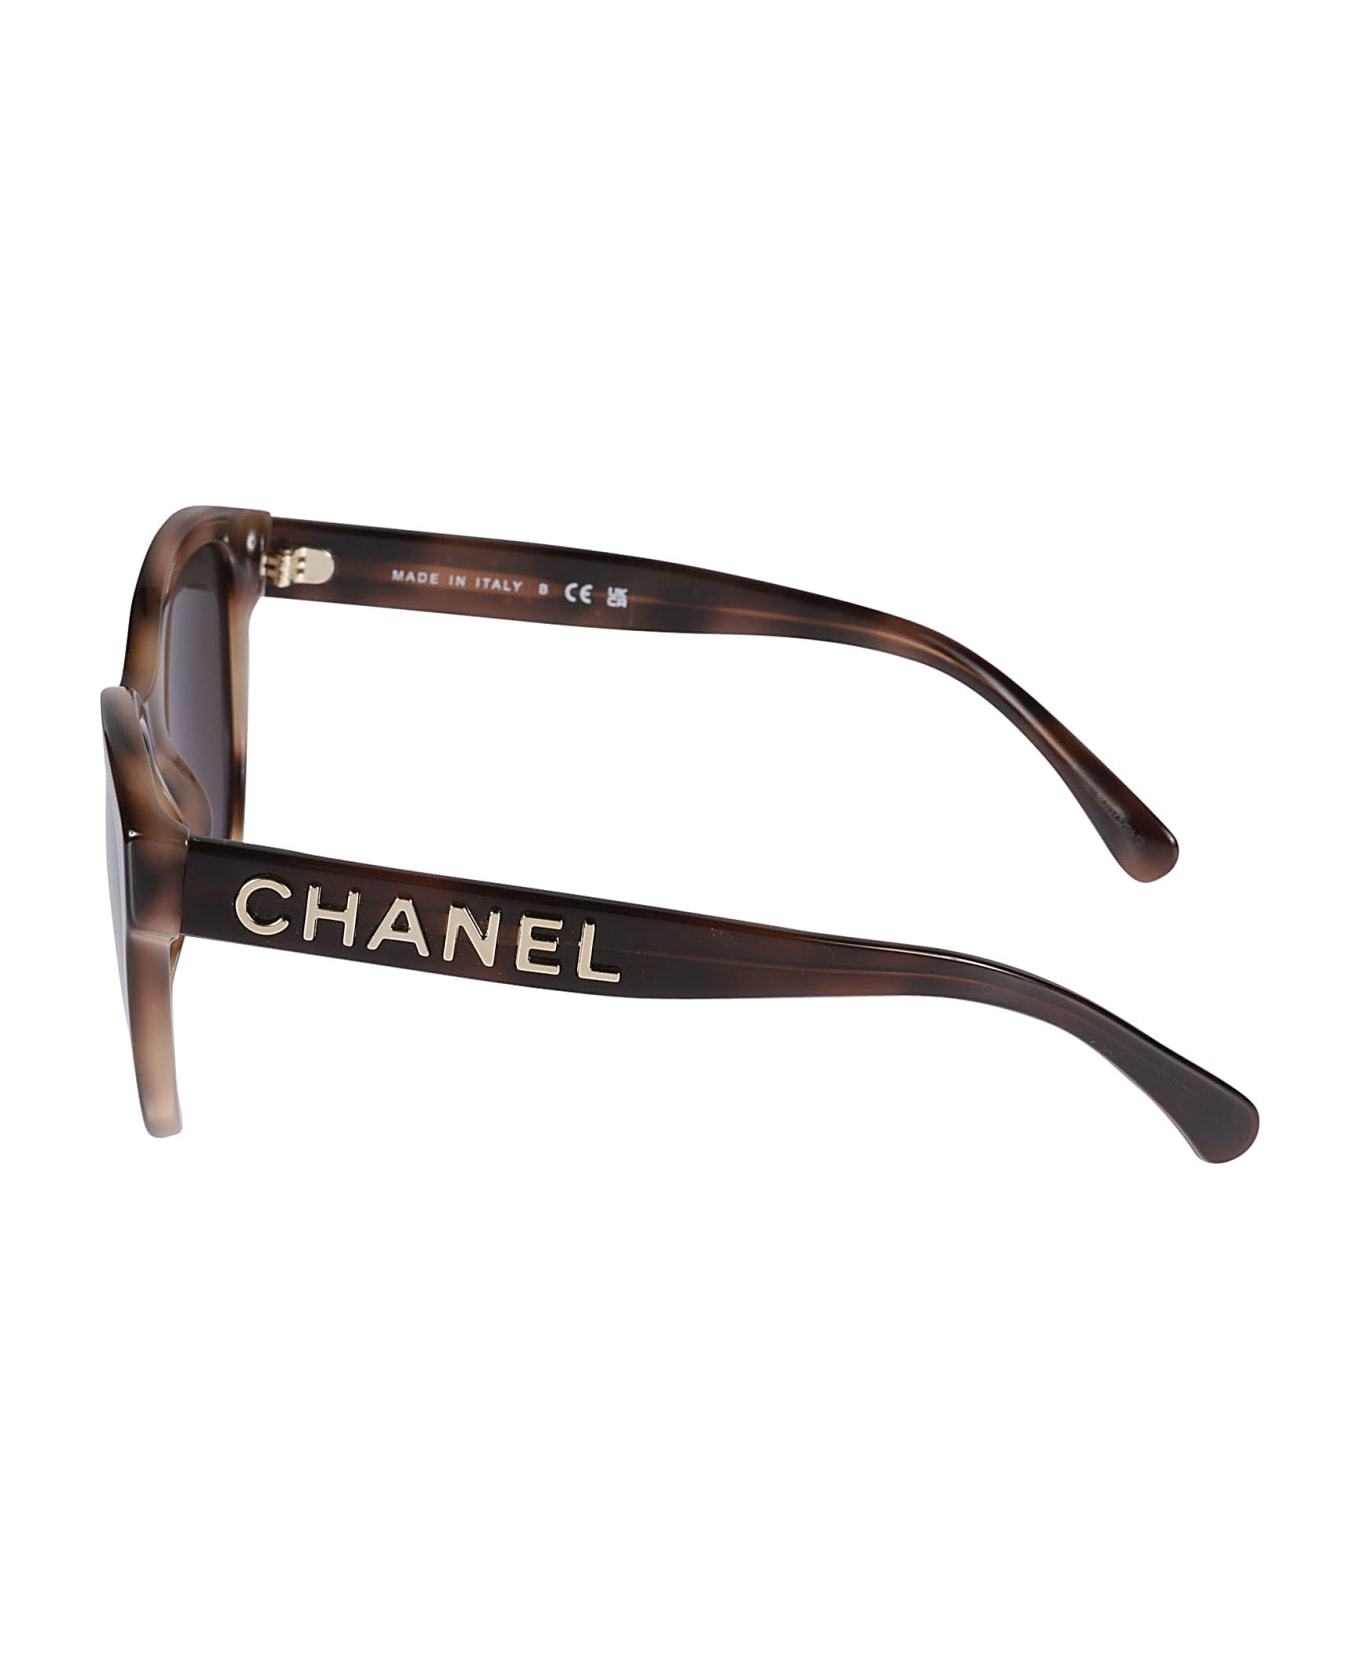 Chanel Butterfly Acetate Sunglasses - 1661/3